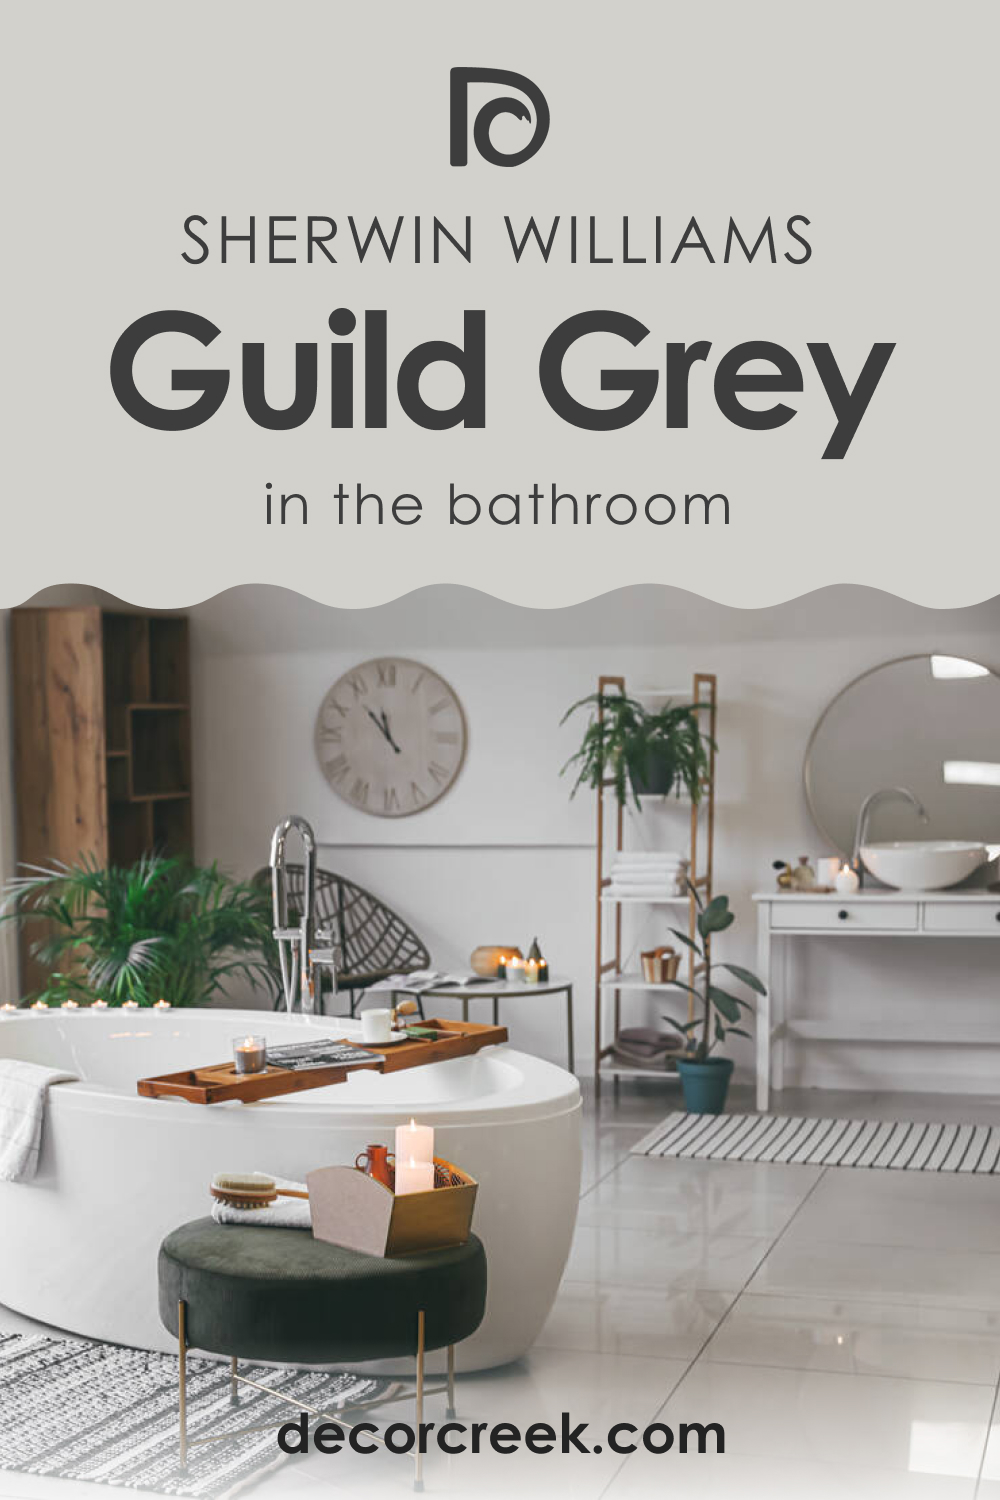 How to Use SW 9561 Guild Grey in the Bathroom?